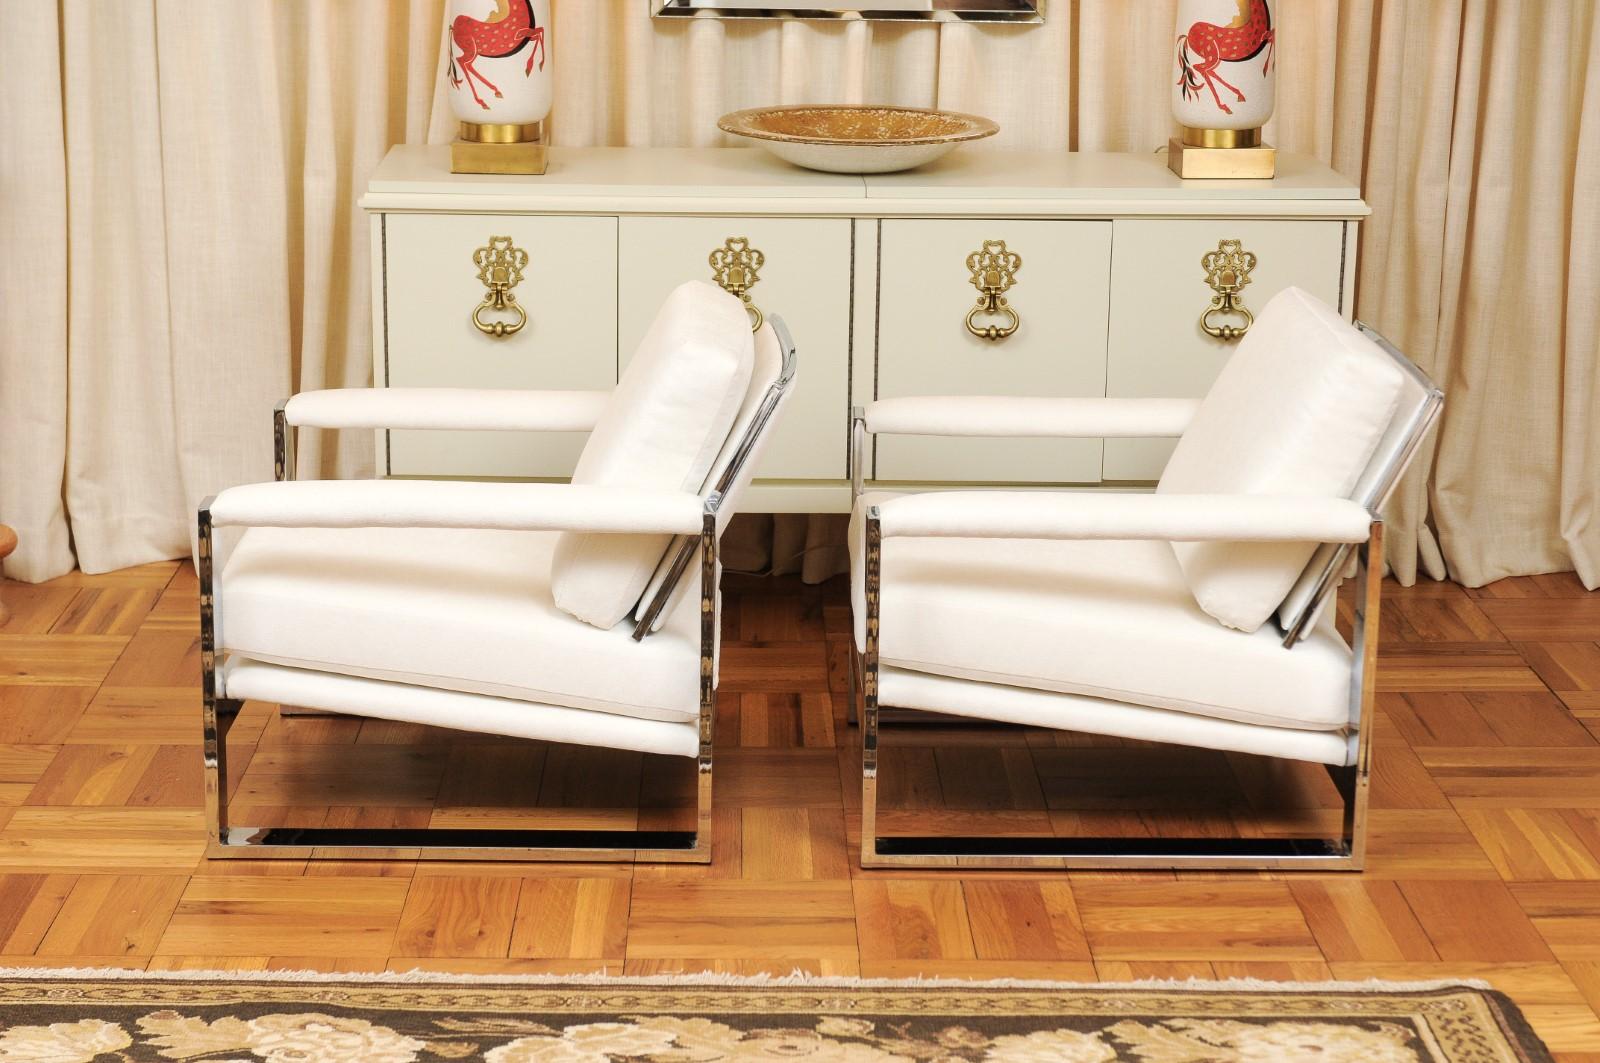 Magnificent Pair of Mirror Chrome Cube Loungers by Milo Baughman, circa 1975 For Sale 5